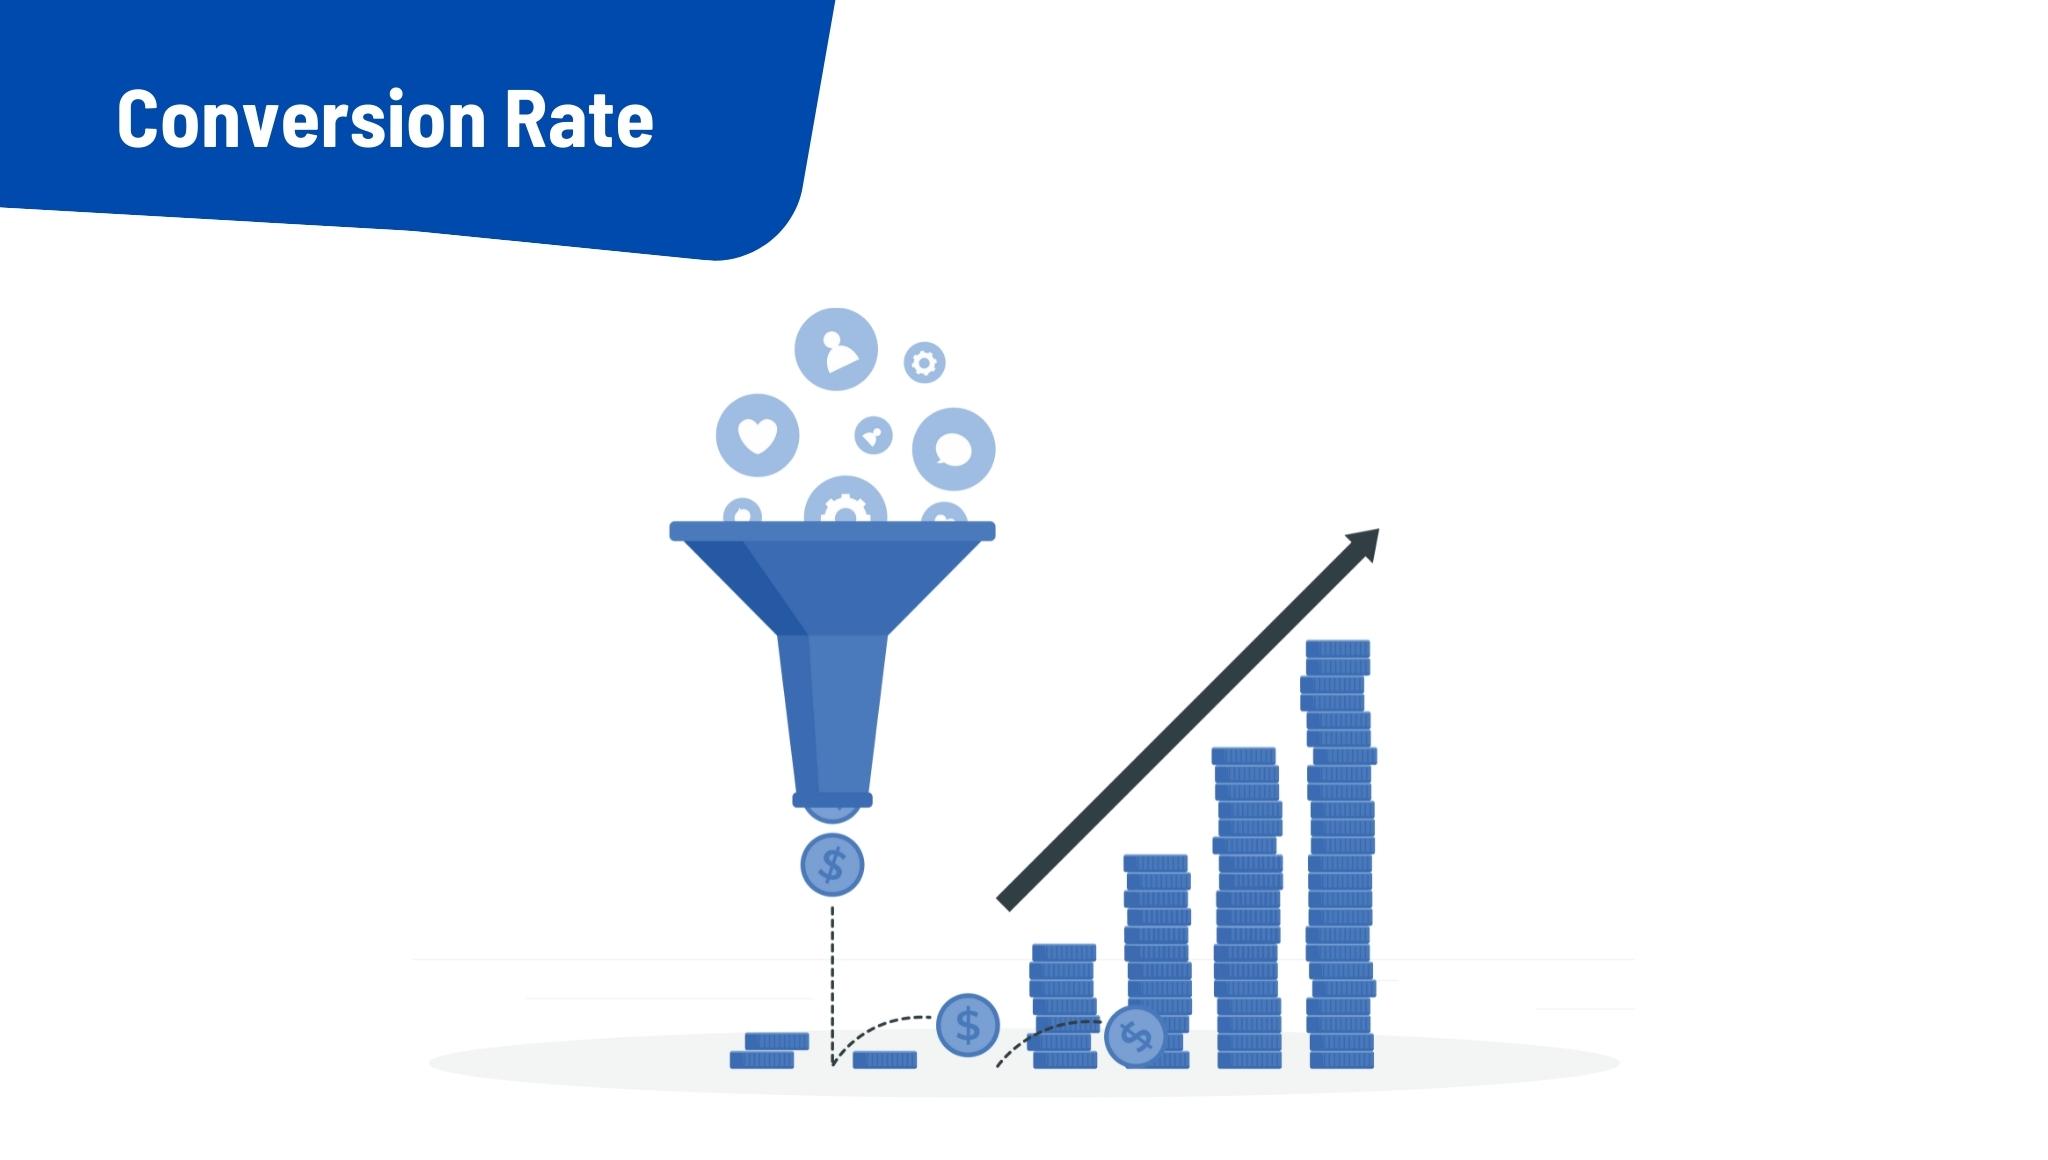 What Is A Conversion Rate?